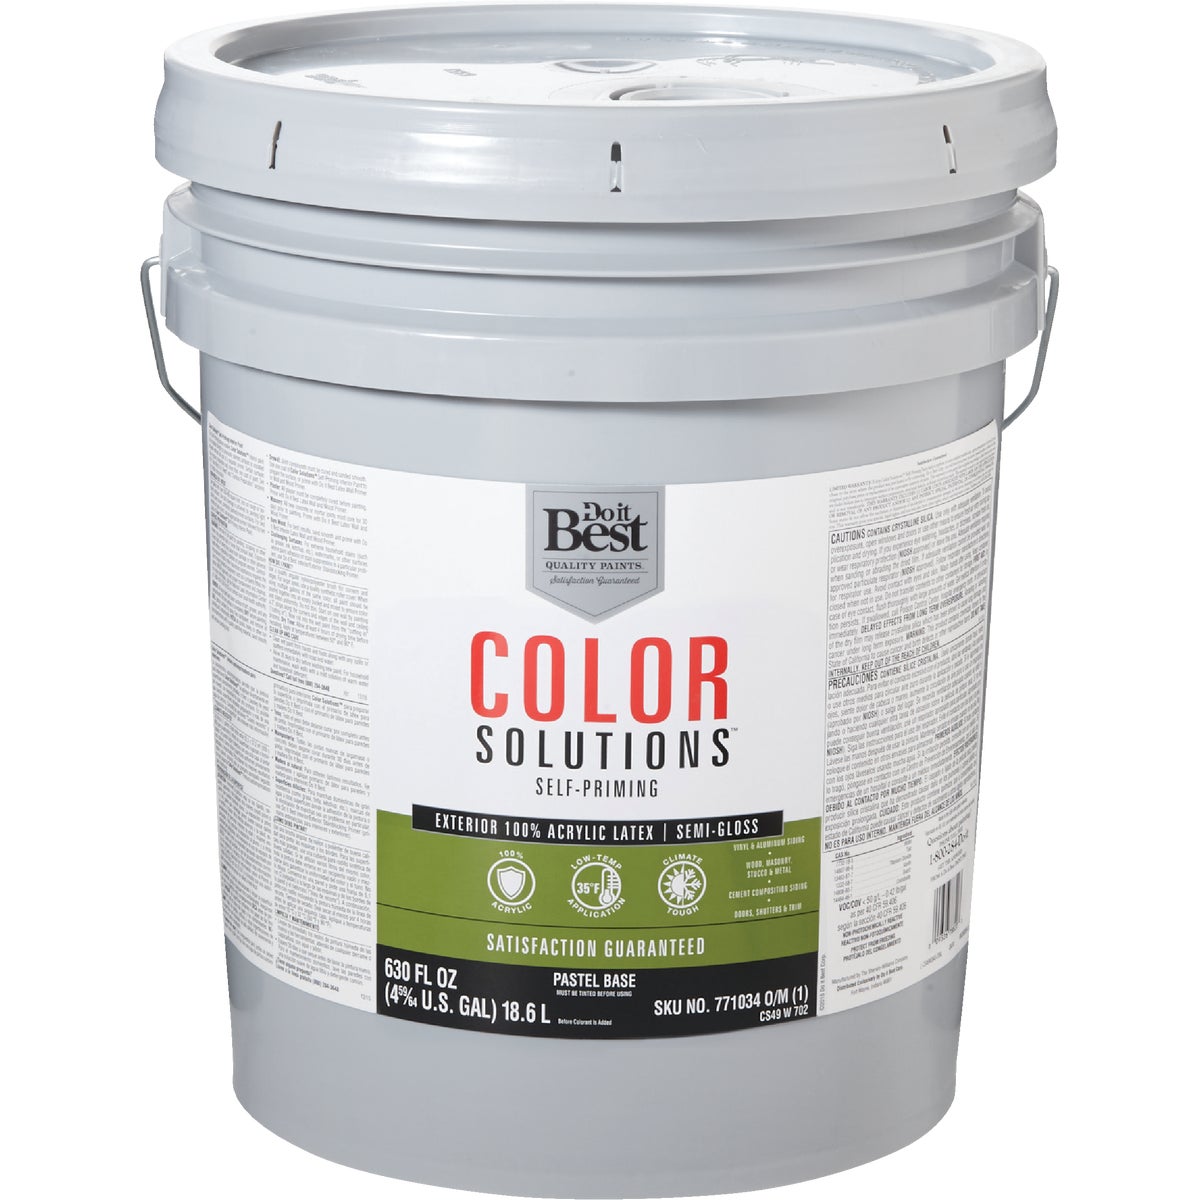 Do it Best Color Solutions 100% Acrylic Latex Self-Priming Semi-Gloss Exterior House Paint, Pastel Base, 5 Gal.